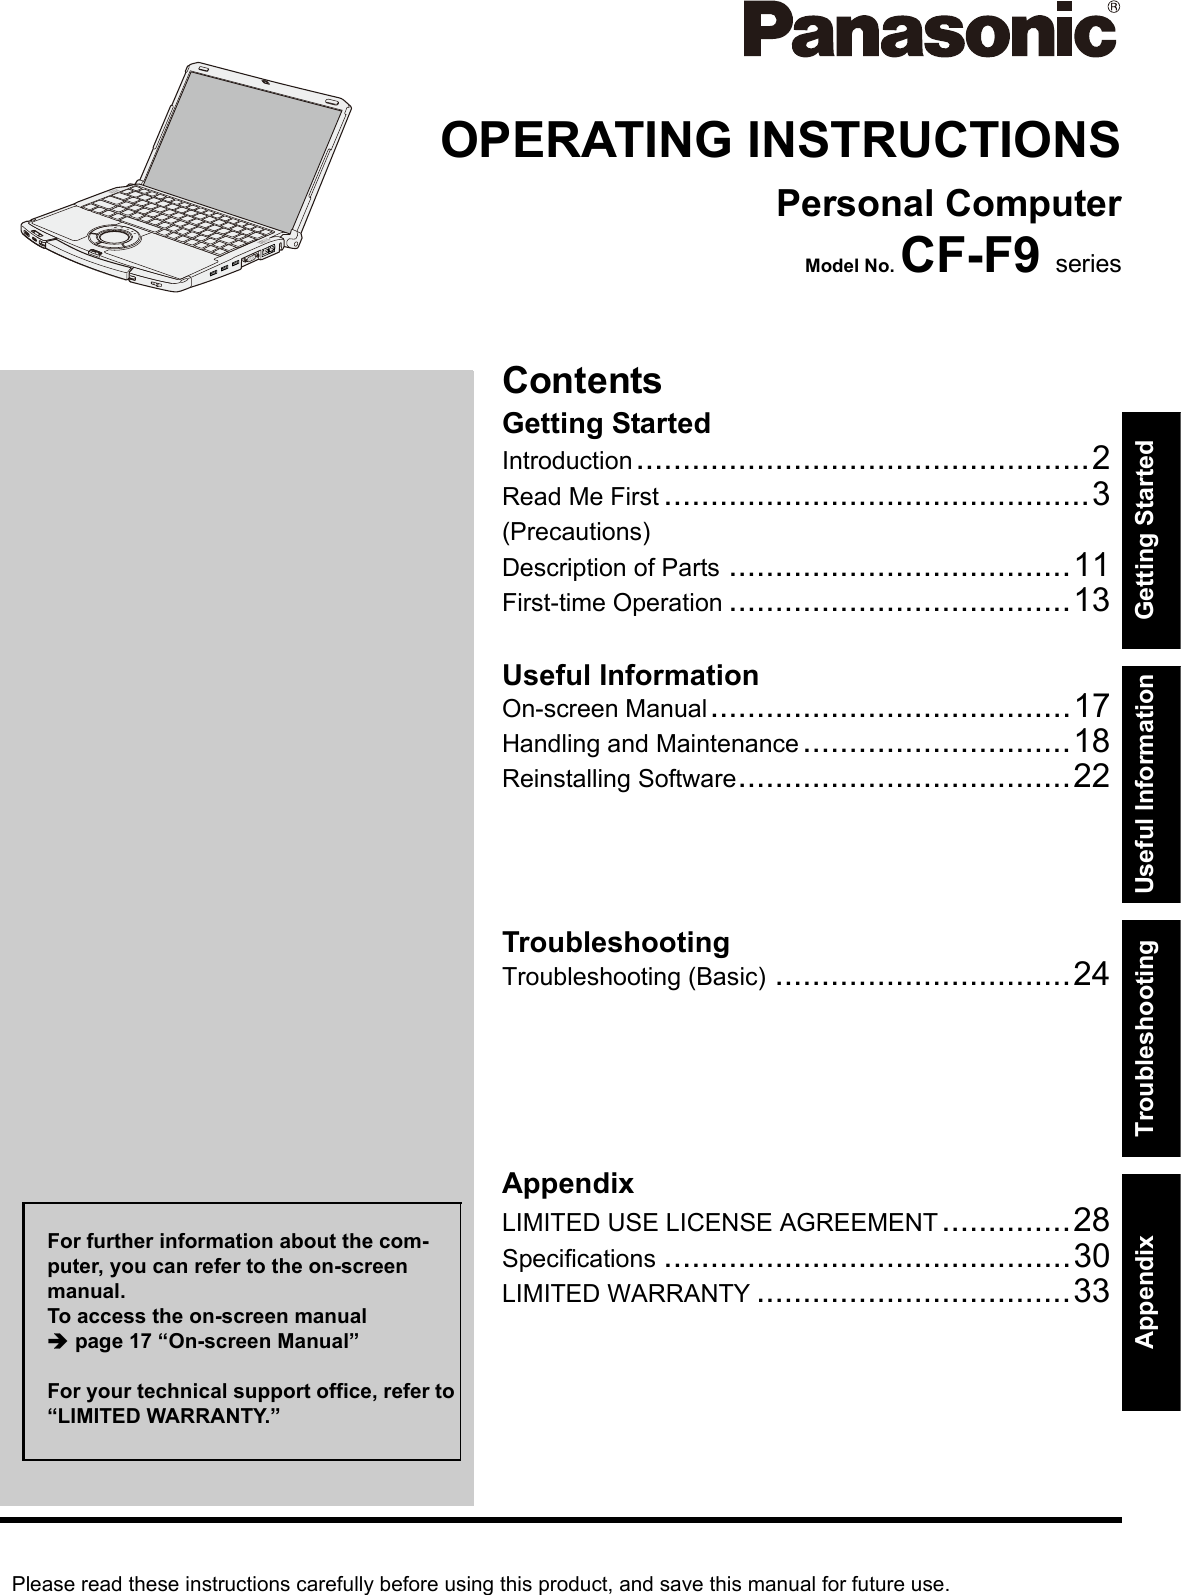 Please read these instructions carefully before using this product, and save this manual for future use.ContentsGetting StartedUseful InformationTroubleshootingGetting StartedUseful InformationTroubleshootingAppendixAppendixOPERATING INSTRUCTIONSPersonal ComputerModel No. CF-F9 seriesIntroduction.................................................2Read Me First ..............................................3(Precautions)Description of Parts .....................................11First-time Operation .....................................13On-screen Manual.......................................17Handling and Maintenance.............................18Reinstalling Software....................................22Troubleshooting (Basic) ................................24LIMITED USE LICENSE AGREEMENT..............28Specifications ............................................30LIMITED WARRANTY ..................................33For further information about the com-puter, you can refer to the on-screen manual.To access the on-screen manual Îpage 17 “On-screen Manual”For your technical support office, refer to “LIMITED WARRANTY.”